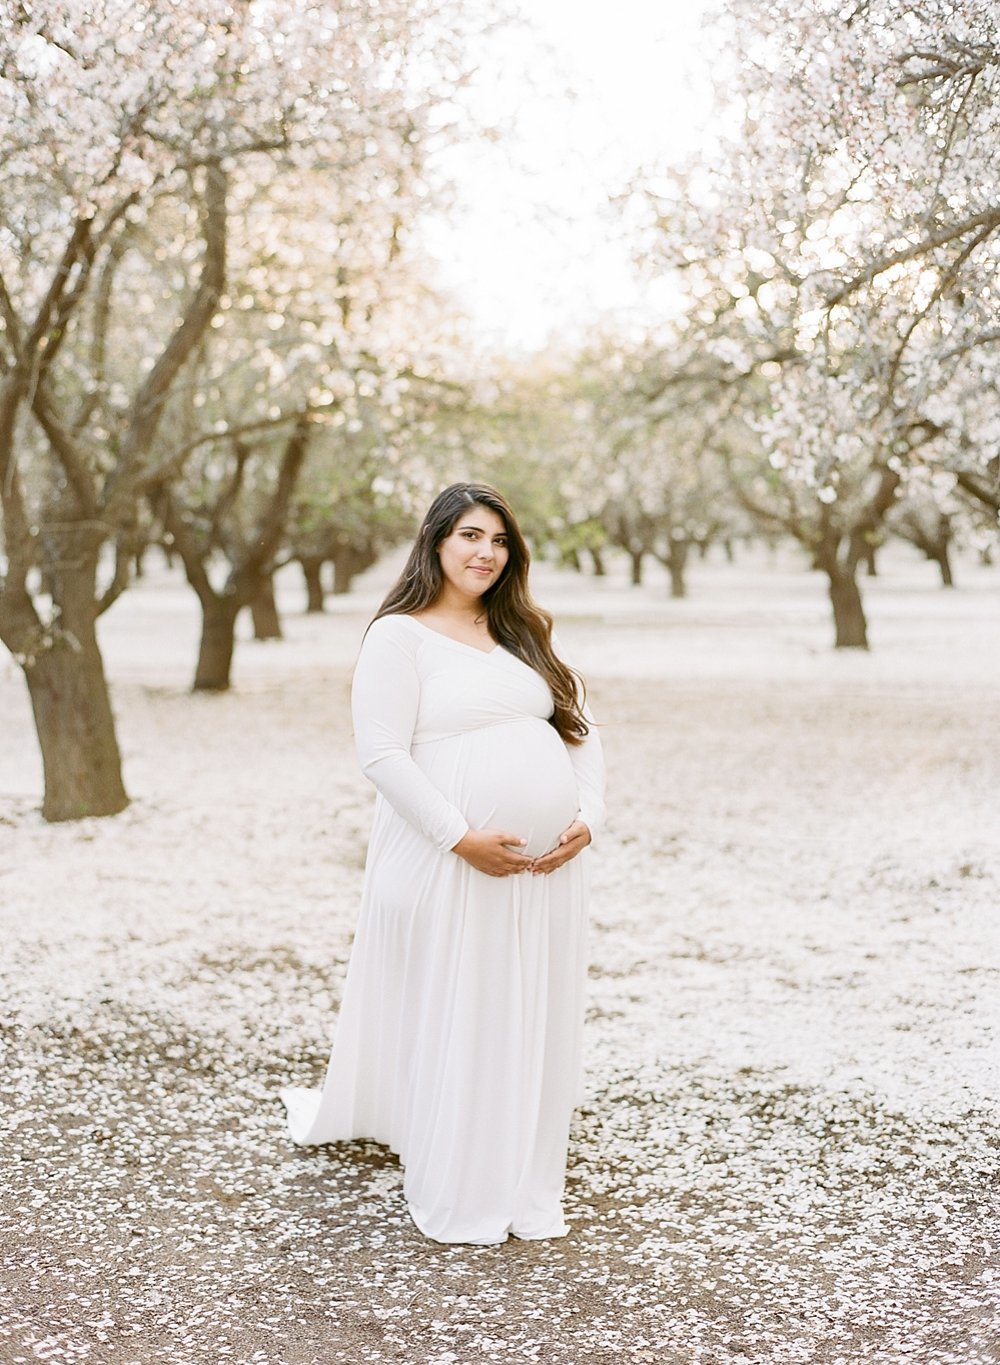 almond orchard maternity session | Danielle Bacon Photography | www.daniellebaconphotography.com |_2510